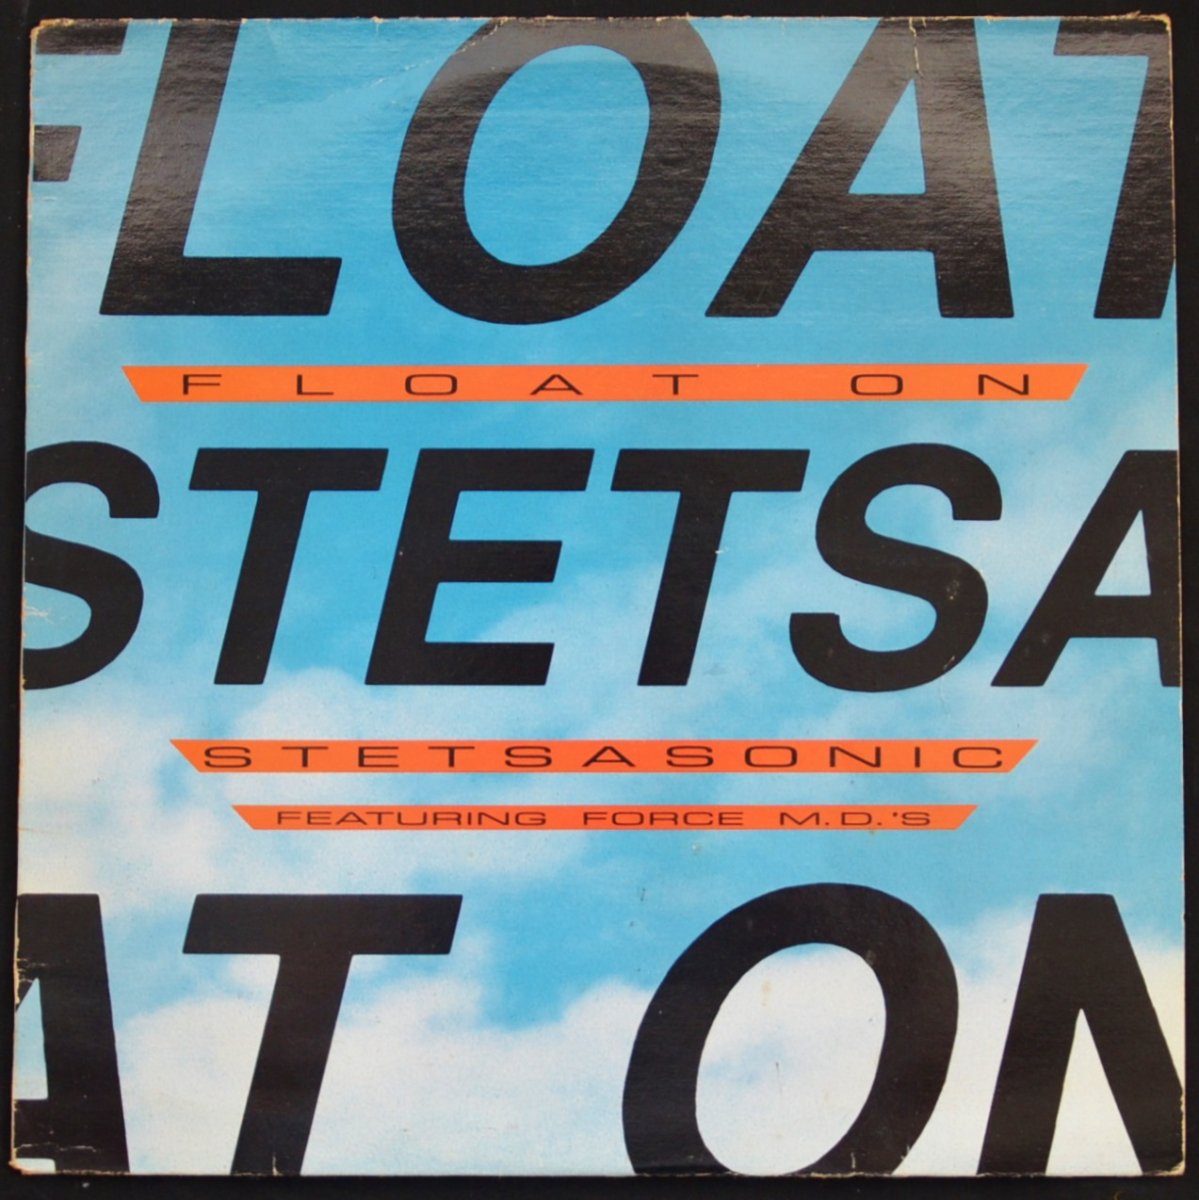 STETSASONIC FEATURING FORCE M.D.'S / FLOAT ON / MIAMI BASS (12